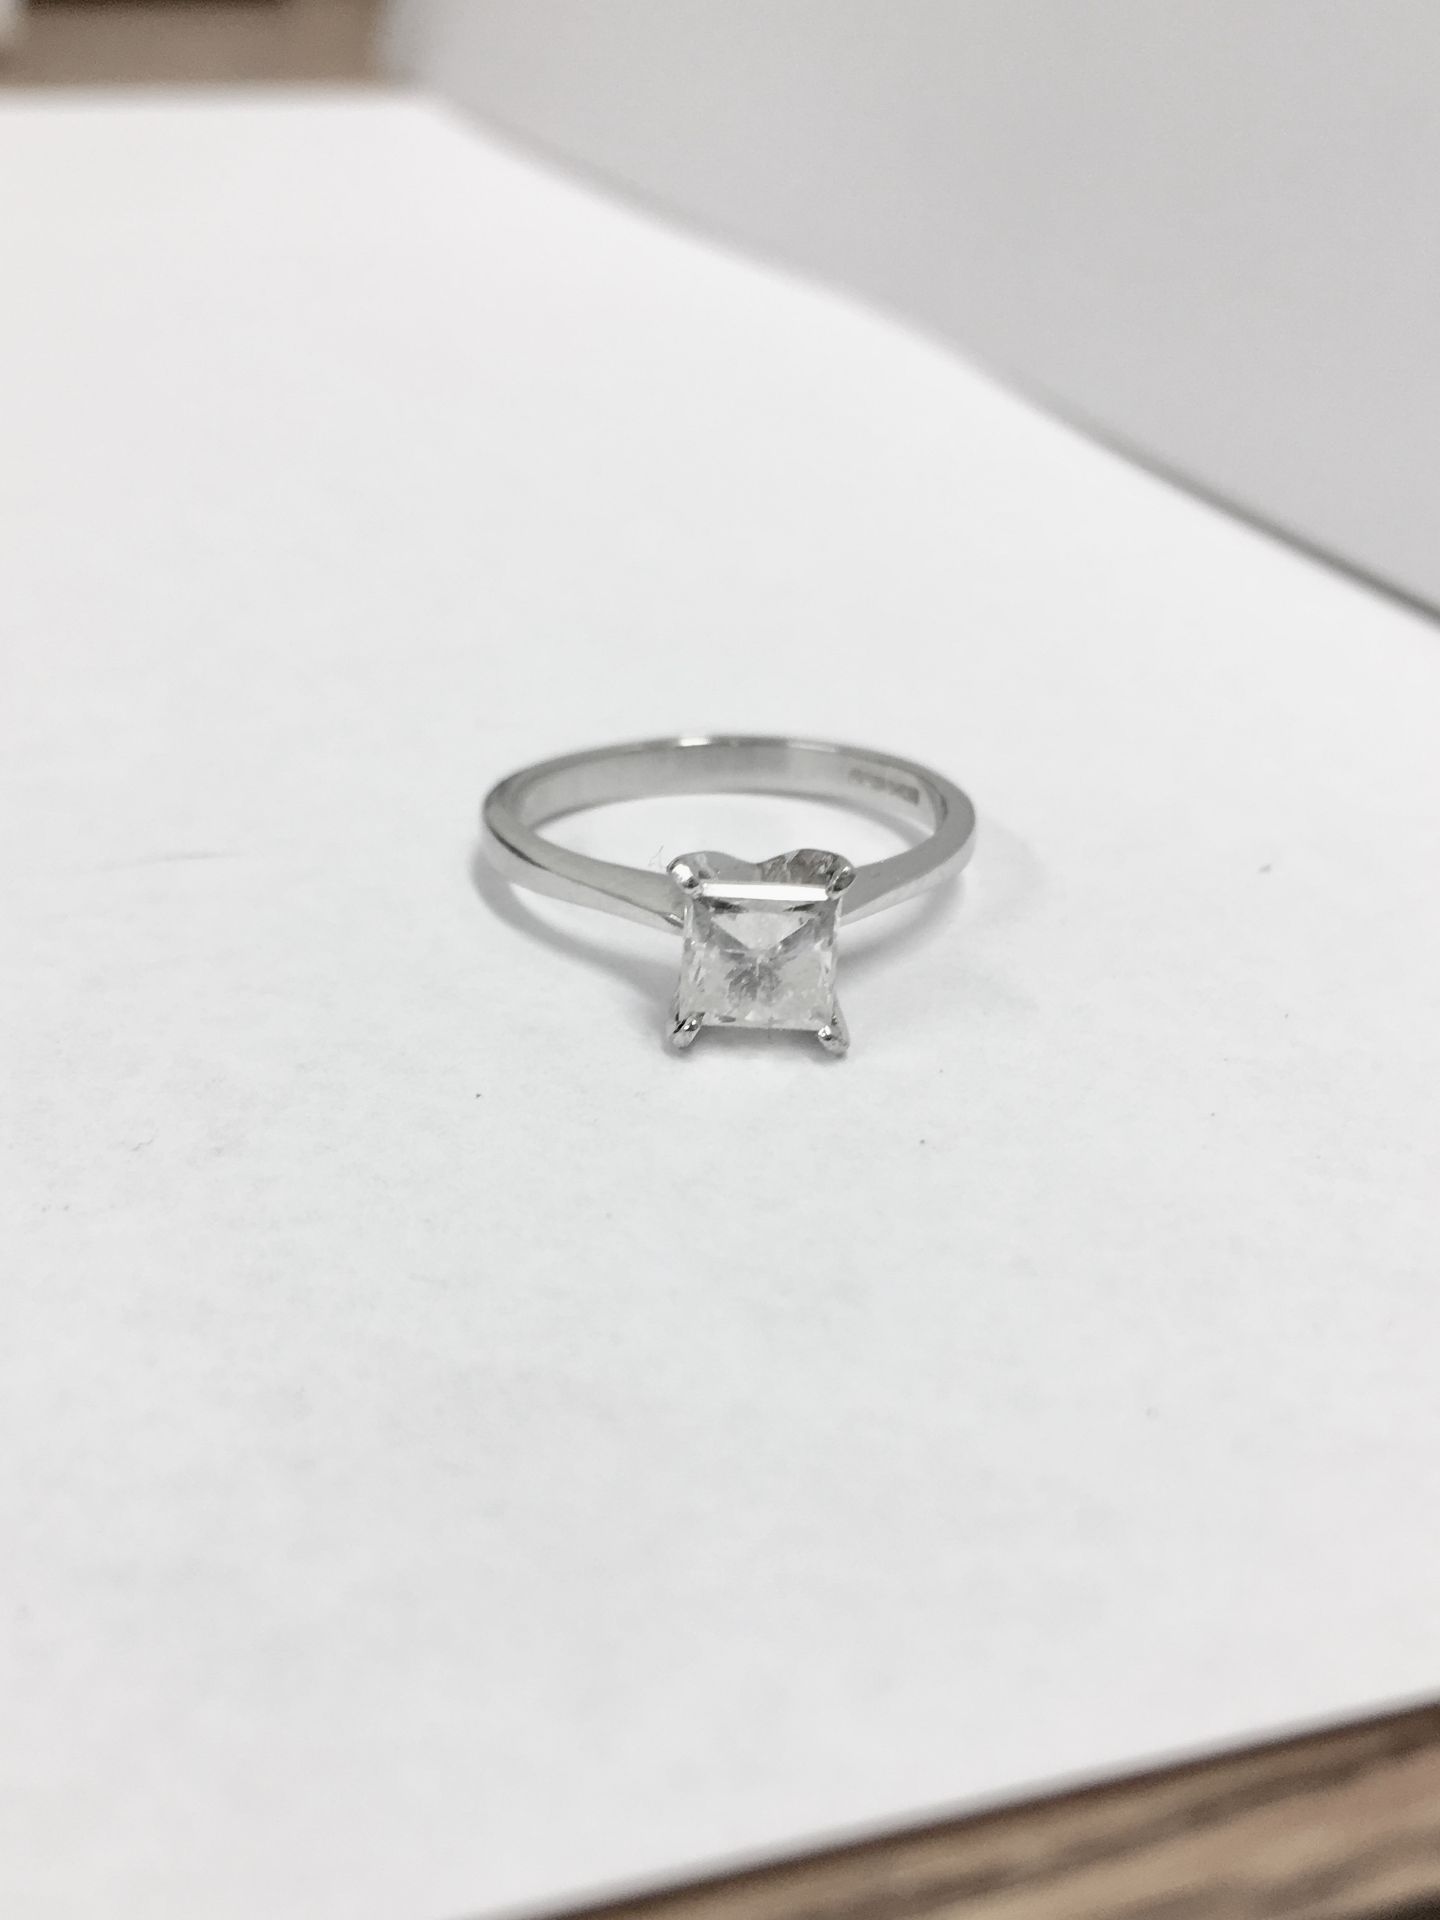 1.09Ct Diamond Solitaire Ring Set With A Princess Cut Diamond. - Image 8 of 9